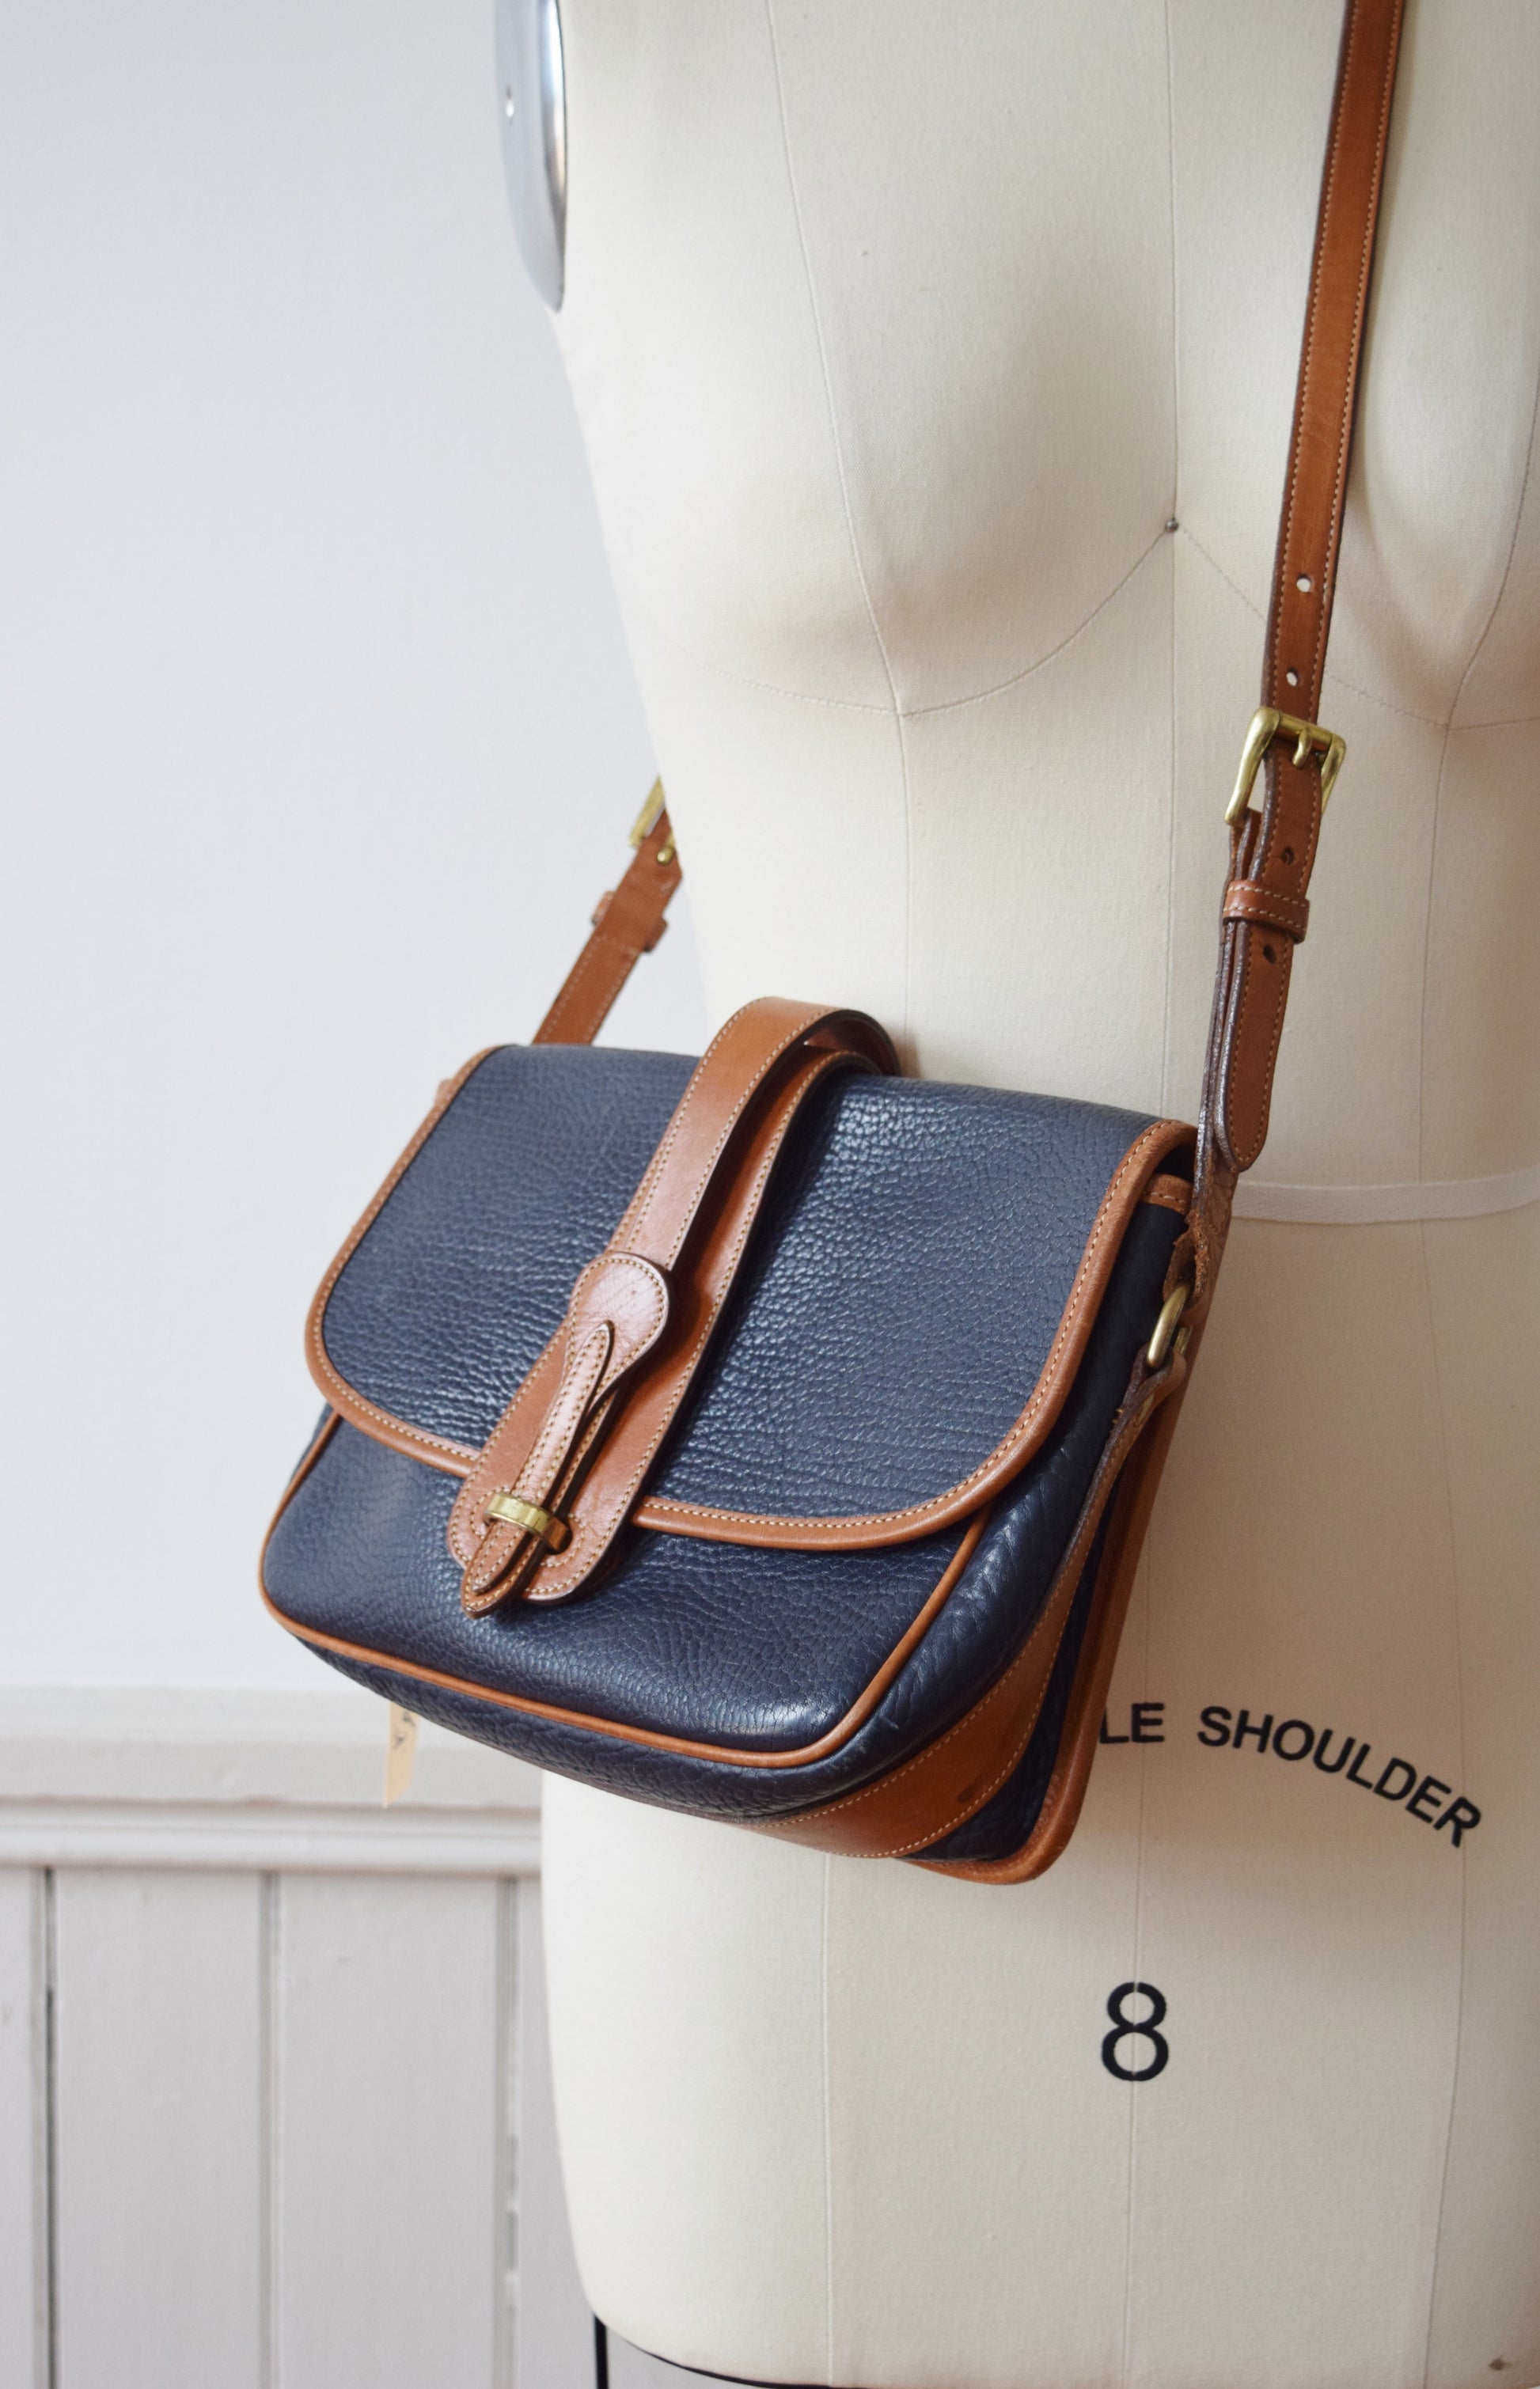 Dooney Bourke All Weather Leather Brown Sling Bag